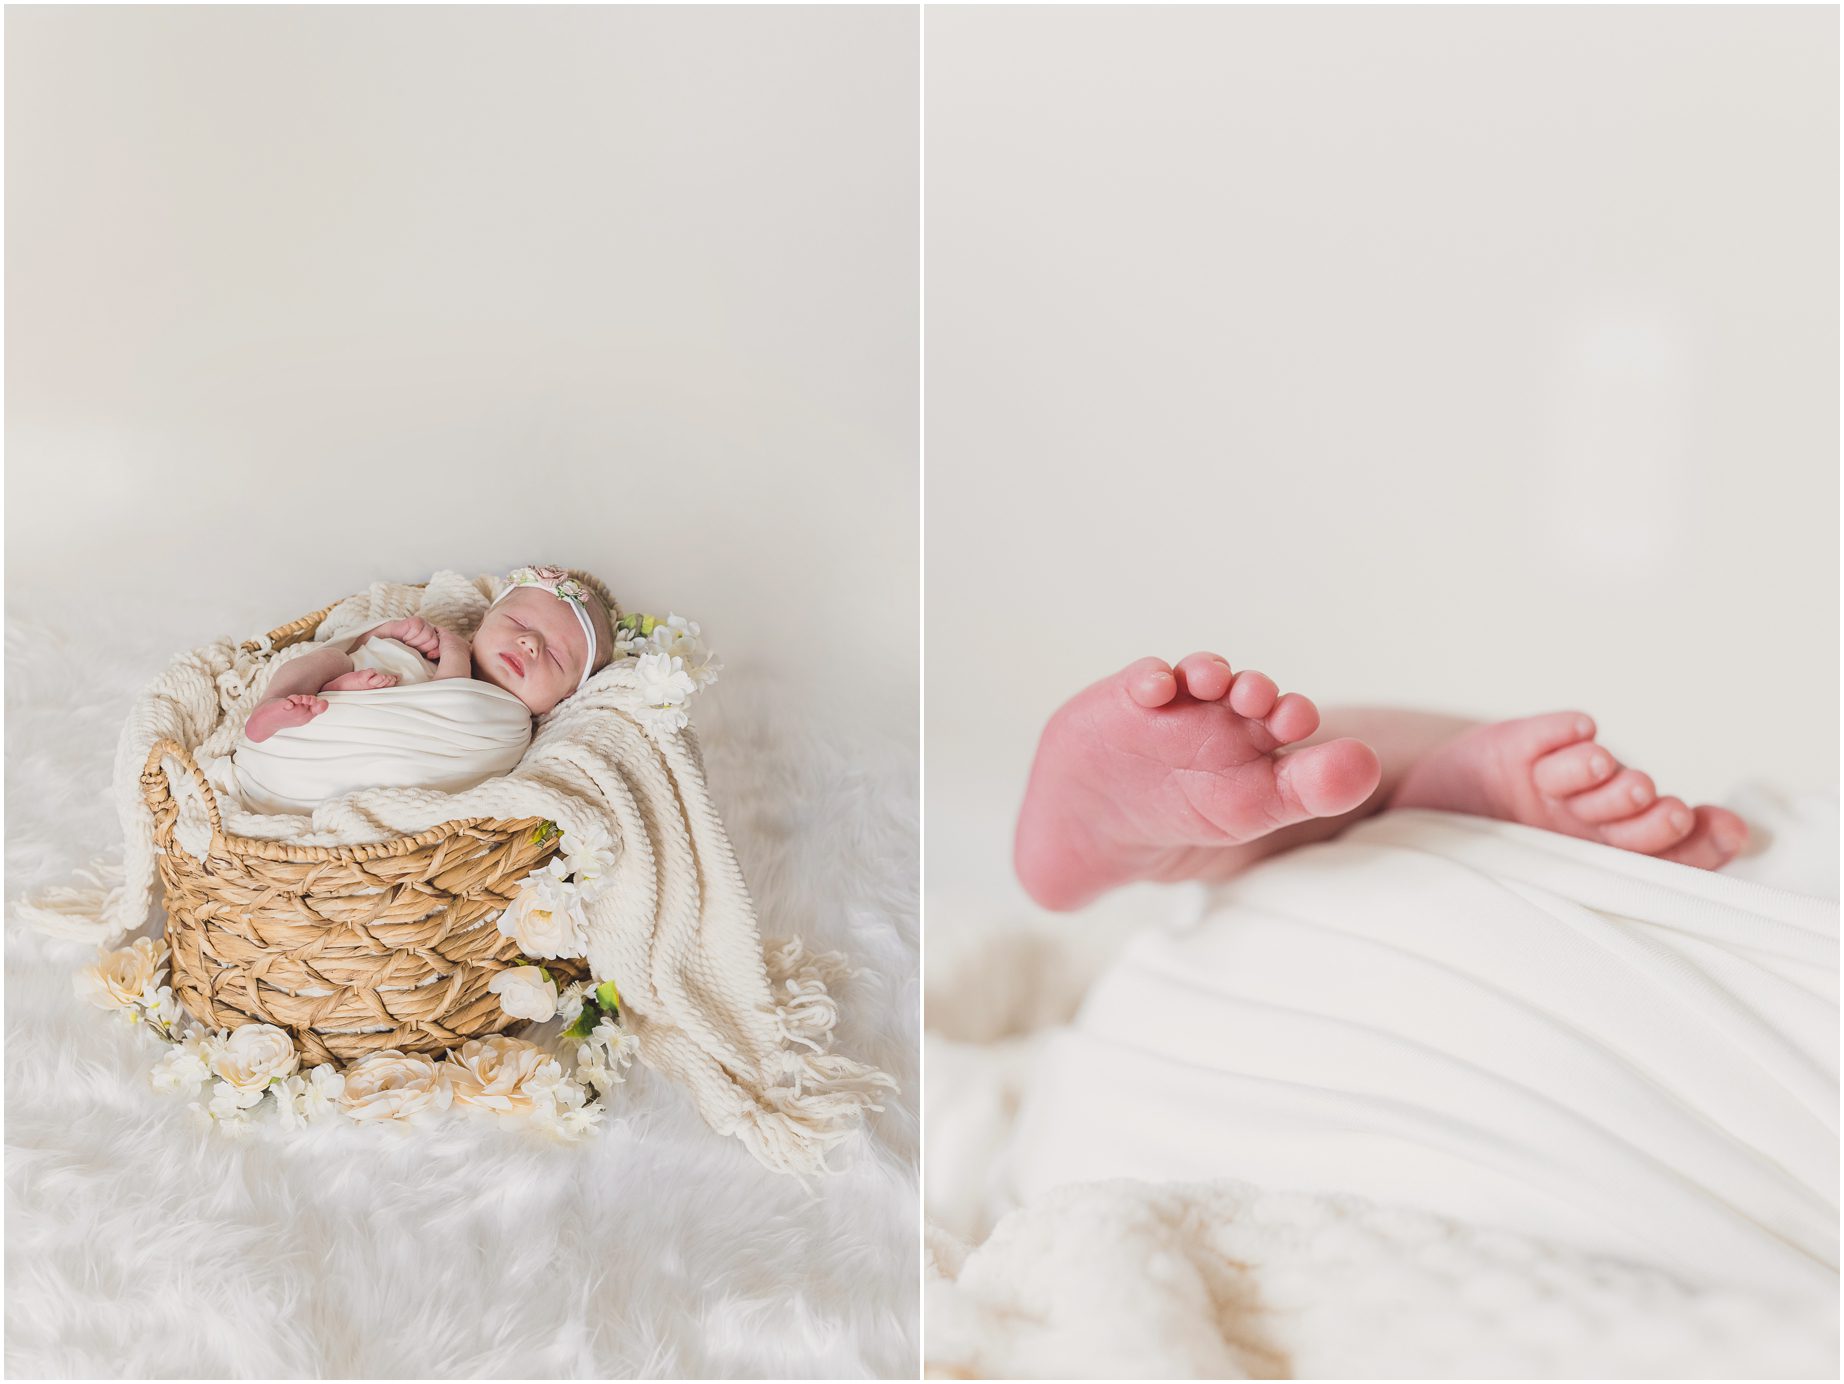 Little Emma rests, wrapped in a basket with white blankets and fabric all around her